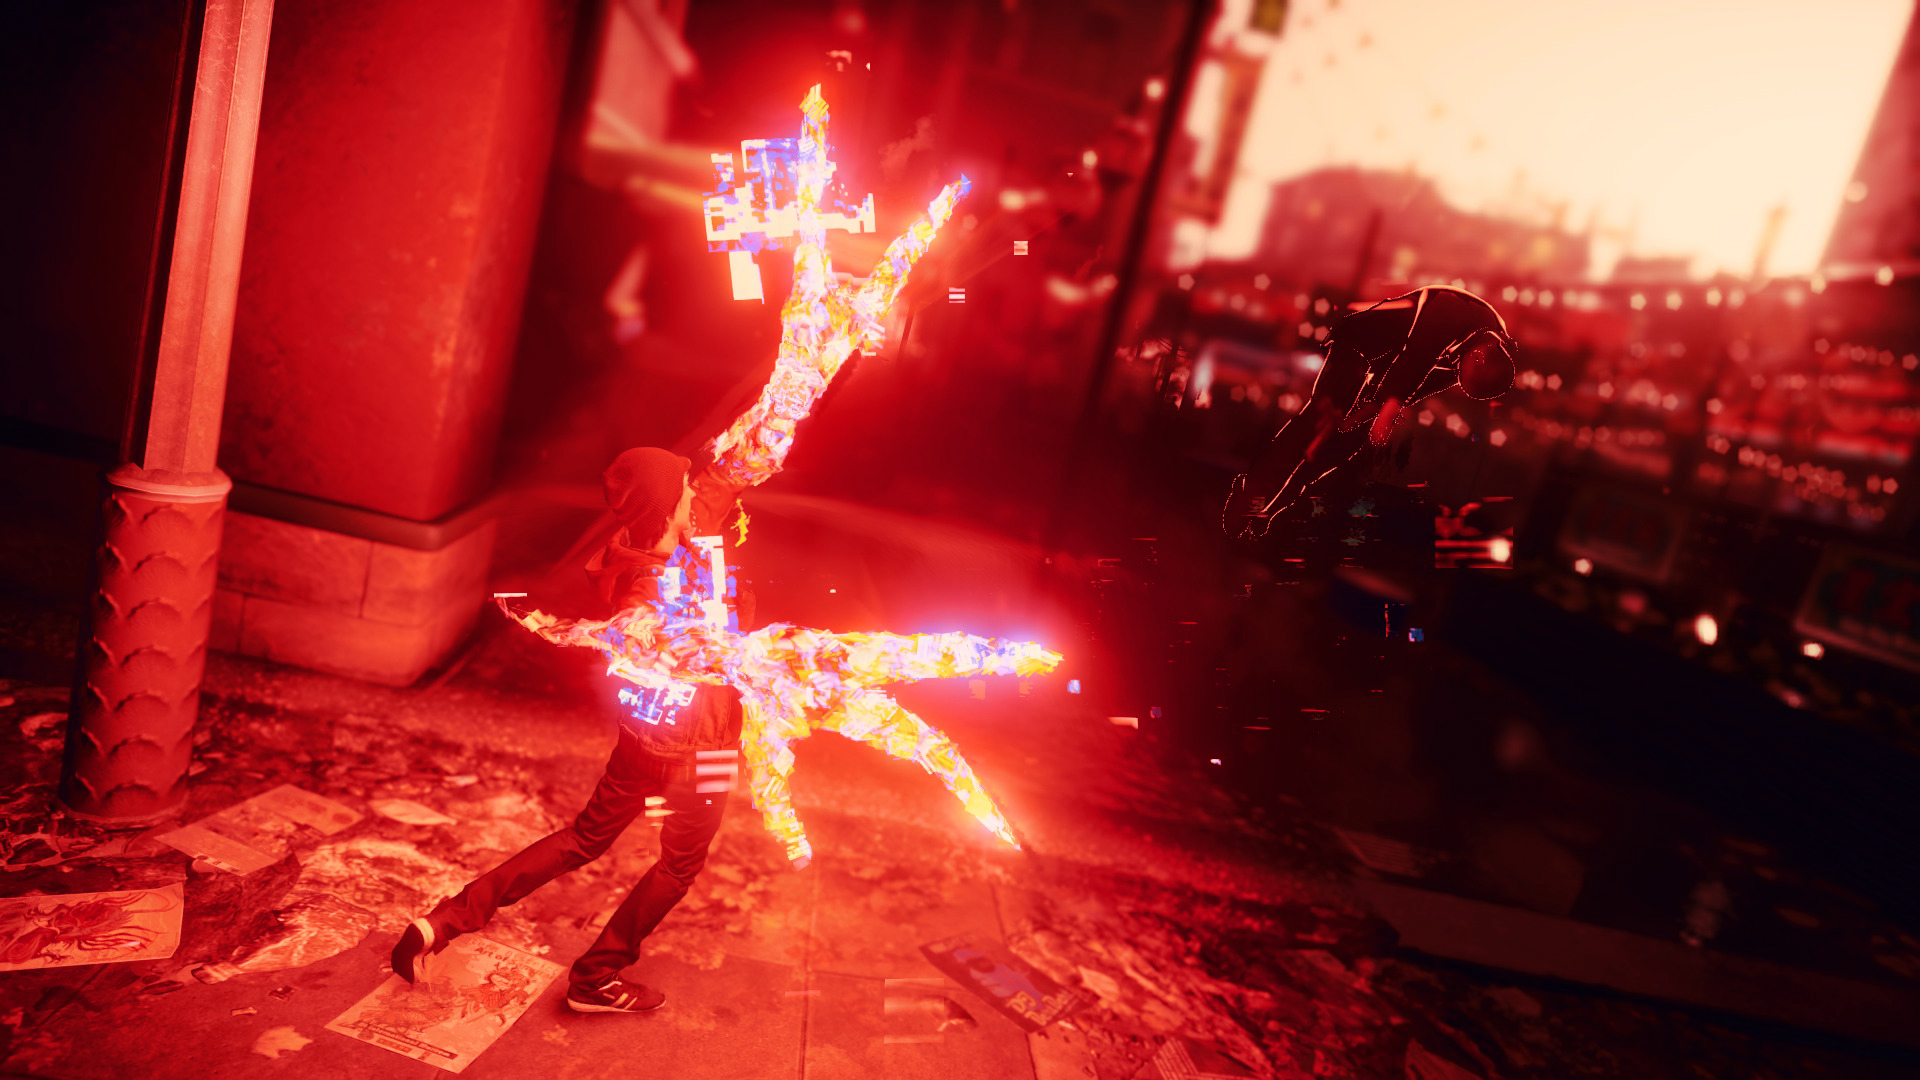 Infamous Second Son Red Video Wallpaper 2 by XtremisMaster on DeviantArt